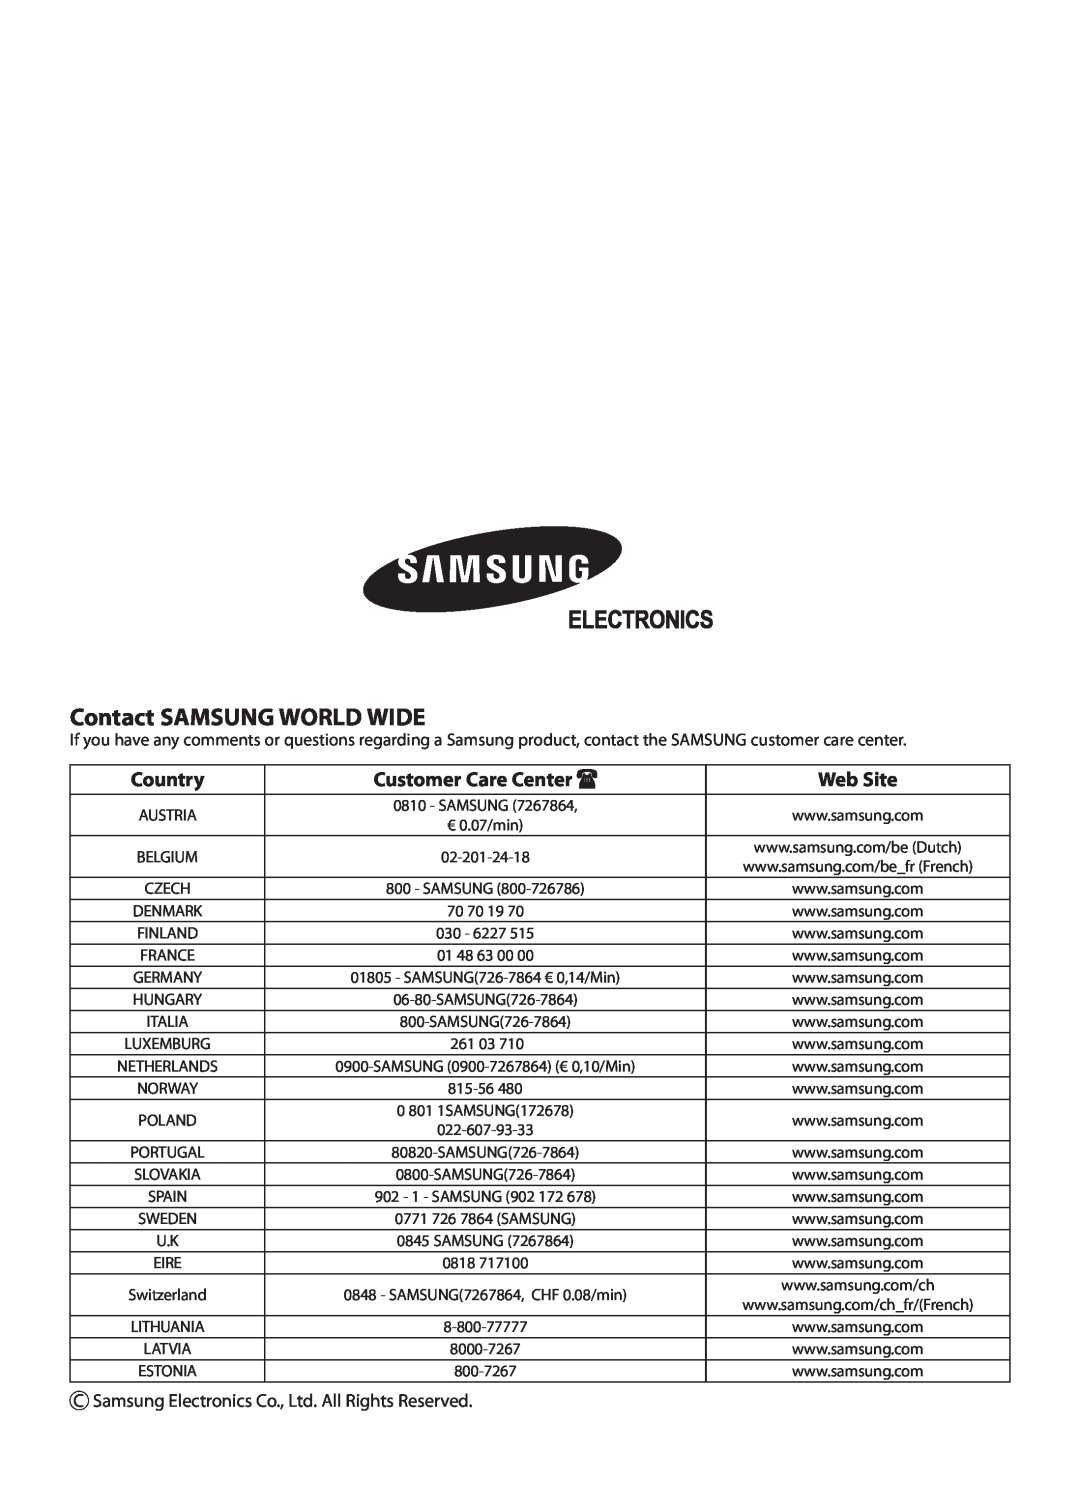 Samsung NS035NHXEA, NS070NHXEA, NS052NHXEA, NS026NHXEA Contact SAMSUNG WORLD WIDE, Country, Customer Care Center, Web Site 